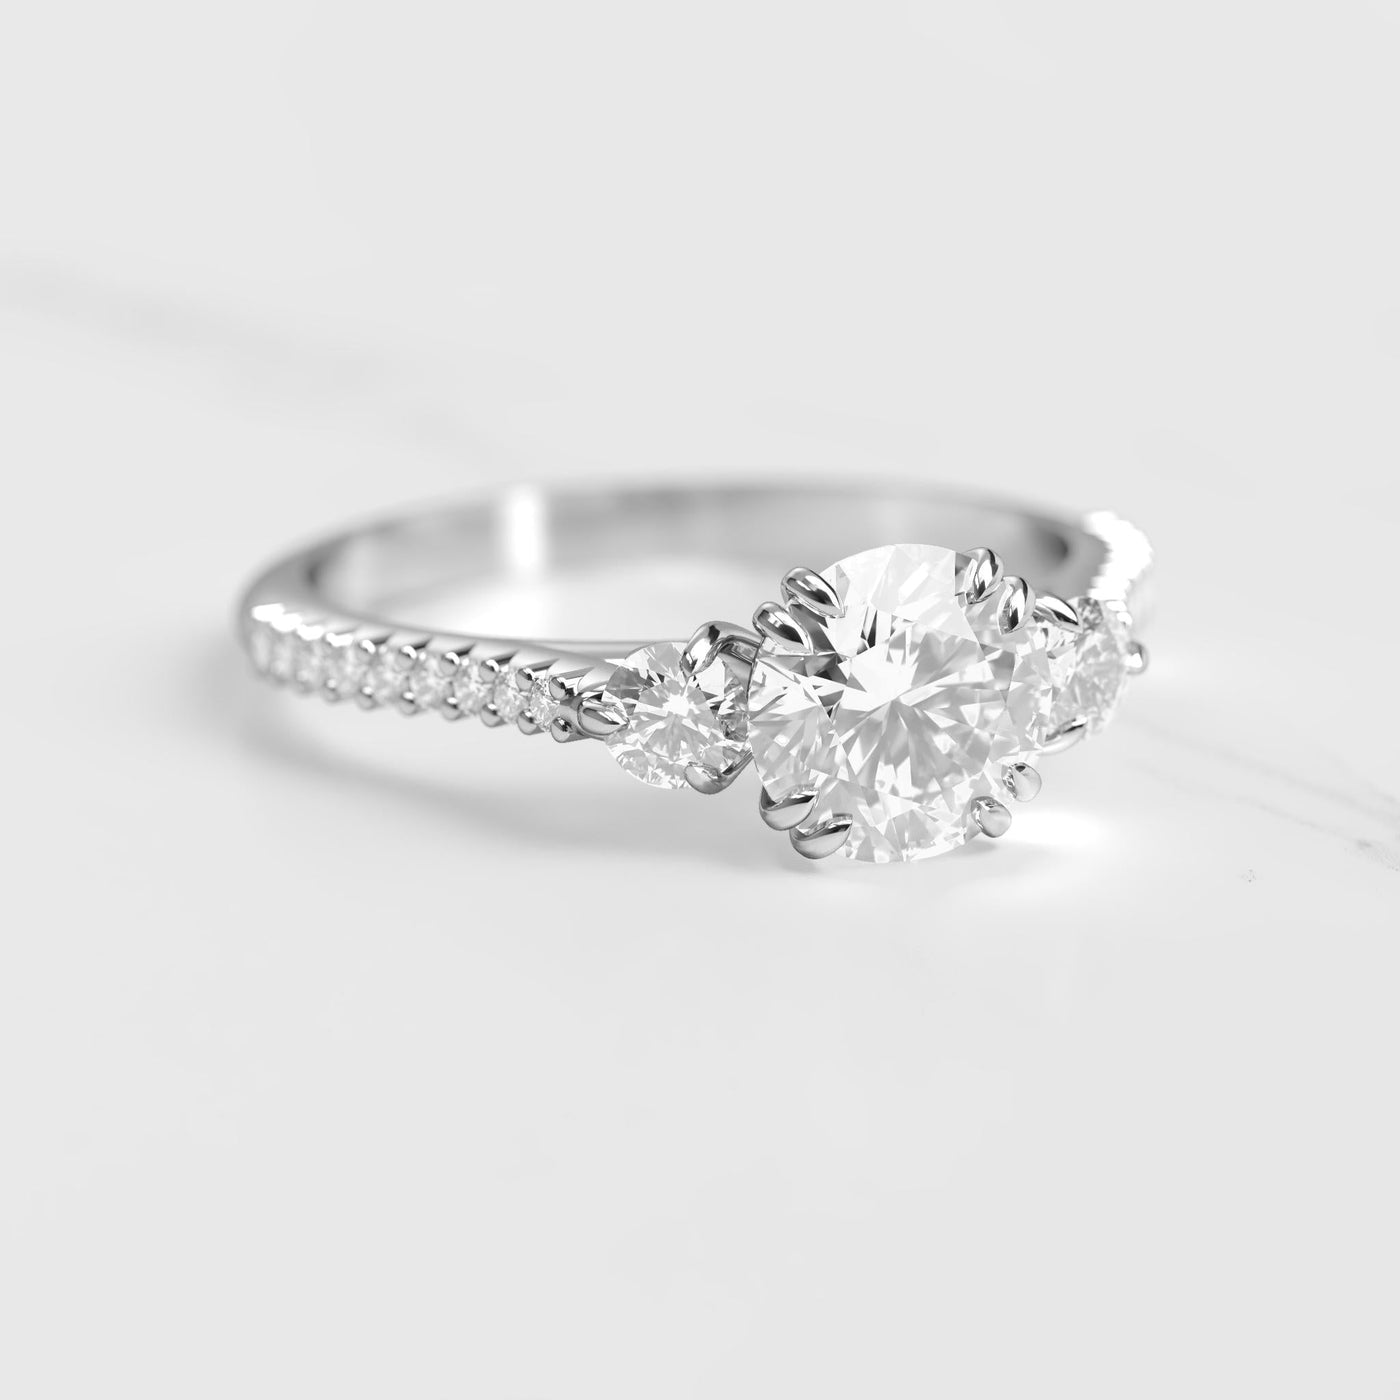 Round half pave diamond ring with accent stones